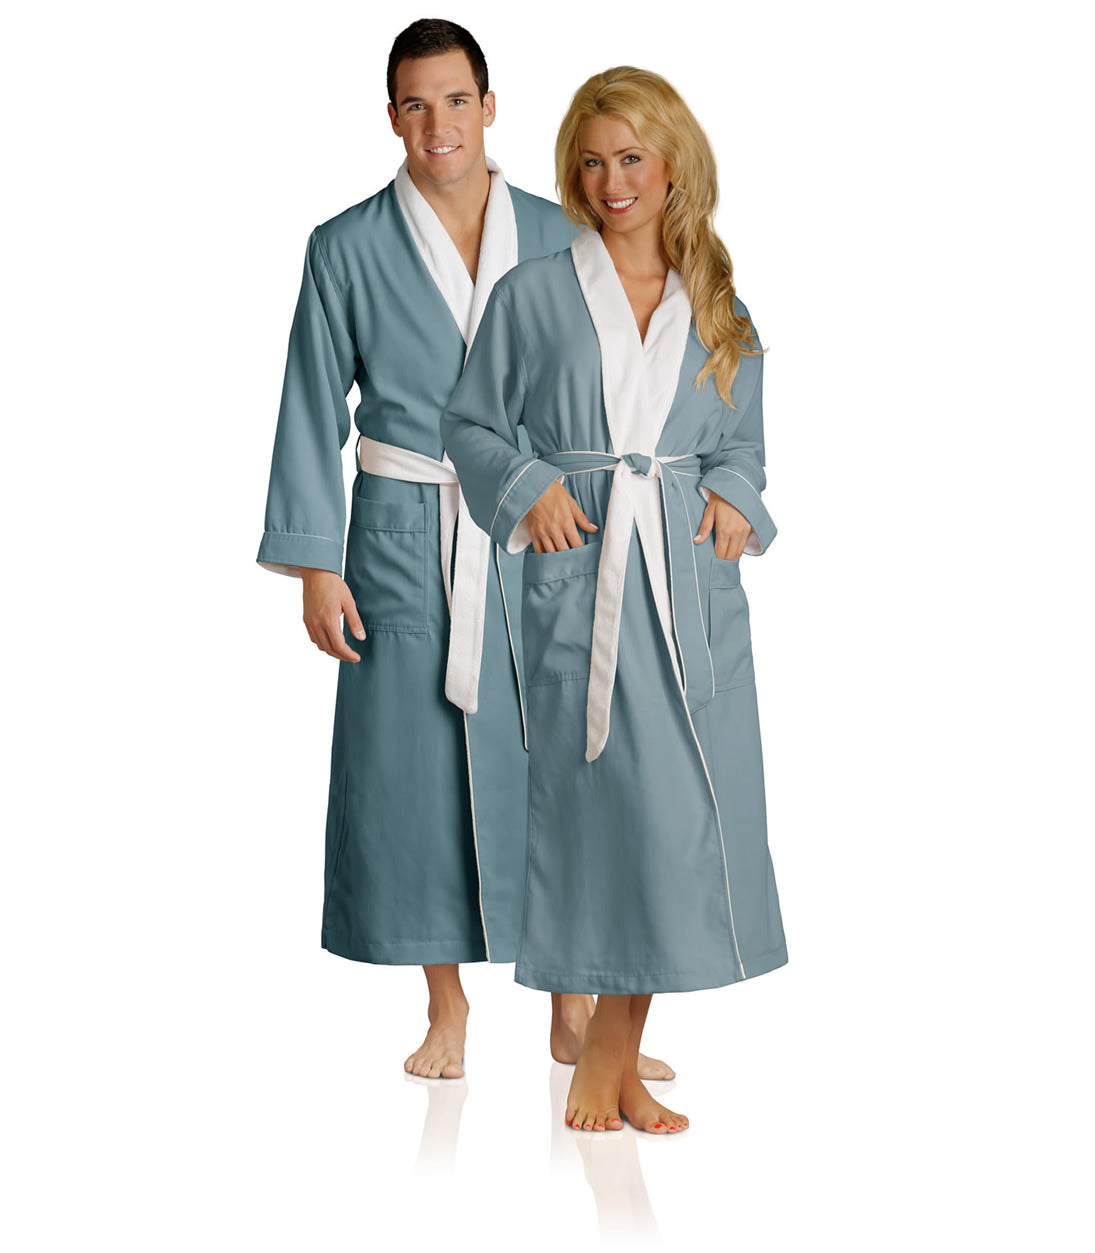 His and Her Luxury Spa Robes